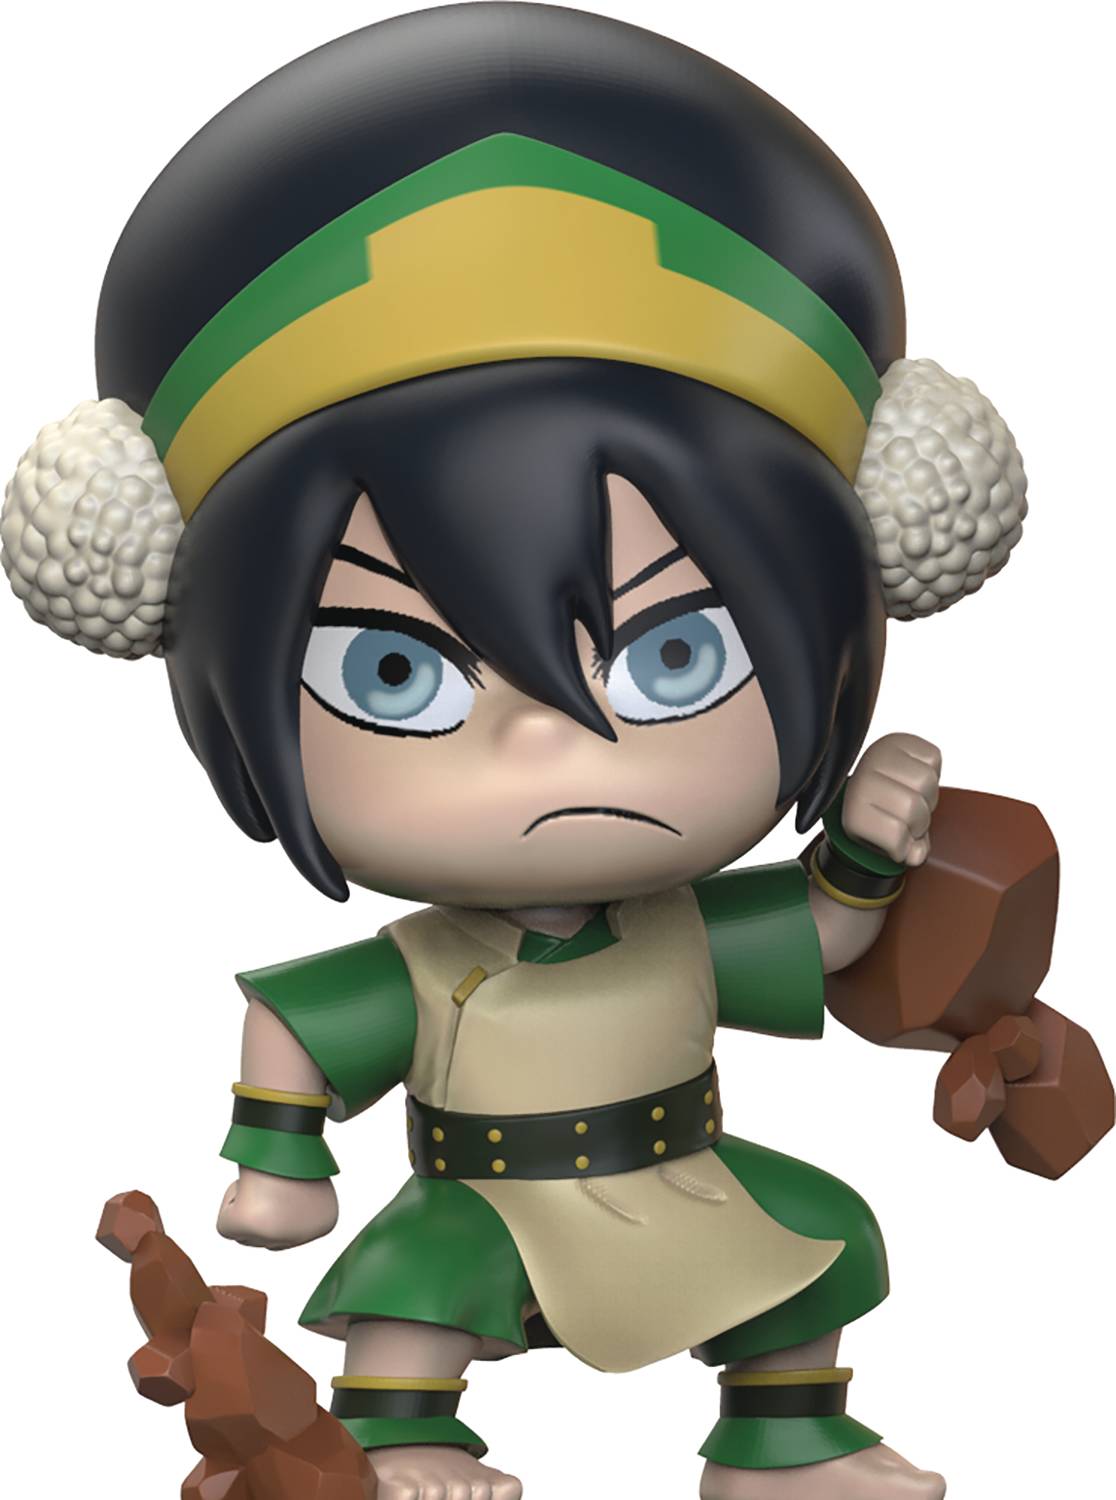 CHEEBEE AVATAR THE LAST AIRBENDER TOPH BEIFONG 3IN FIG